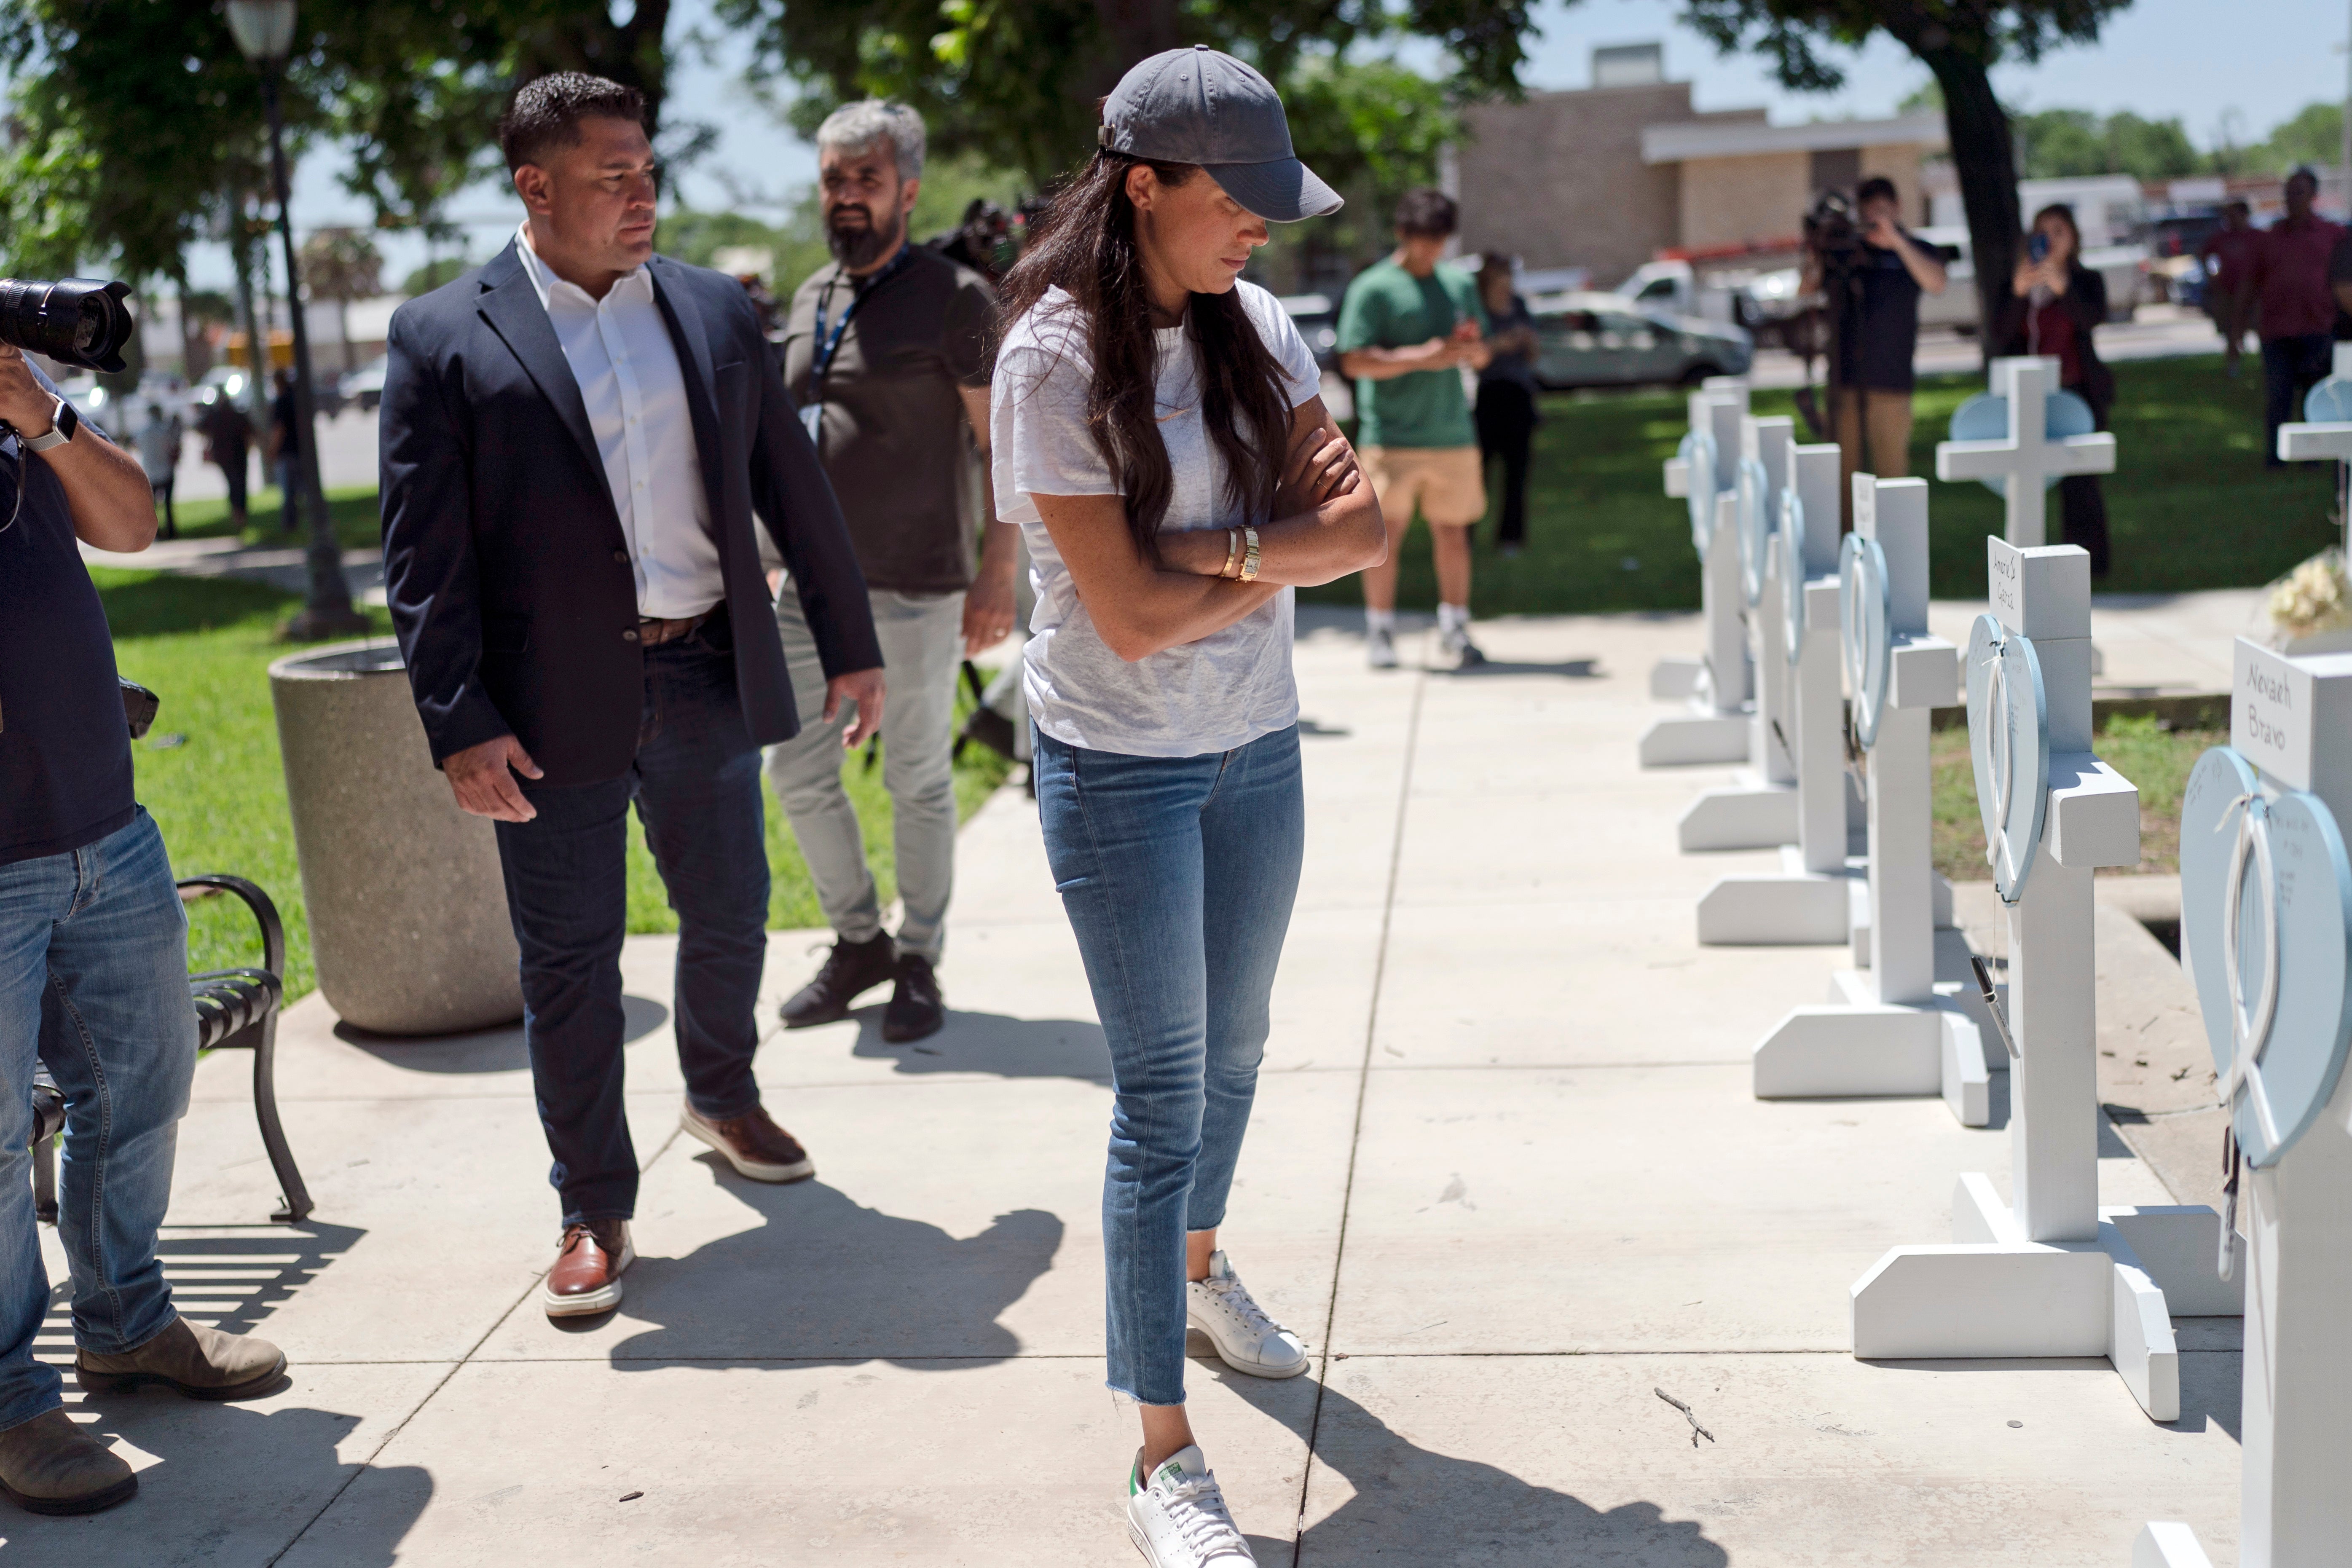 Meghan Markle pays tribute to victims in a surprise visit to the Uvalde memorial site